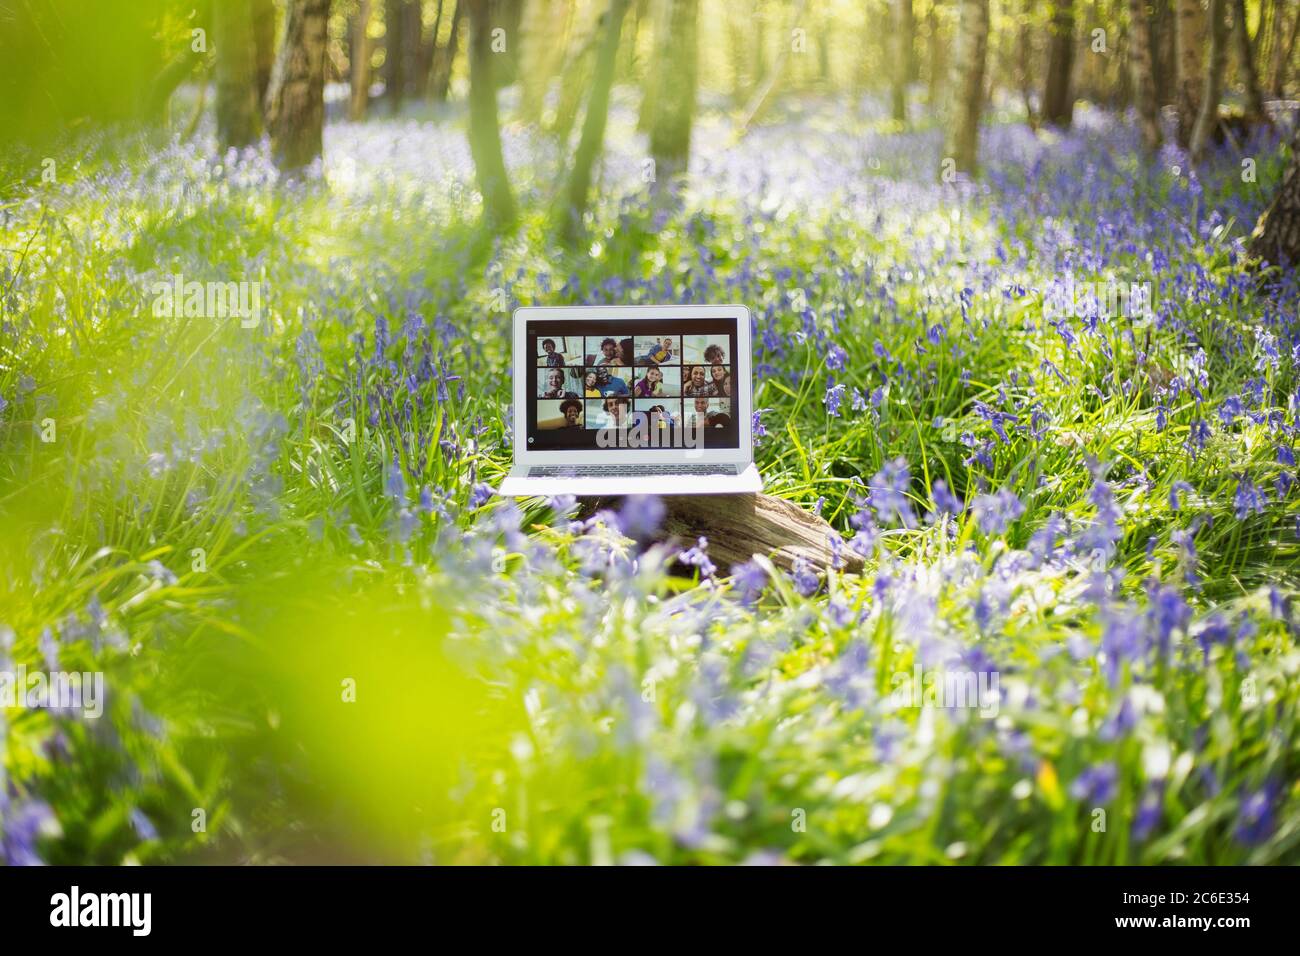 Friends video chatting on laptop screen in sunny bluebell woods Stock Photo